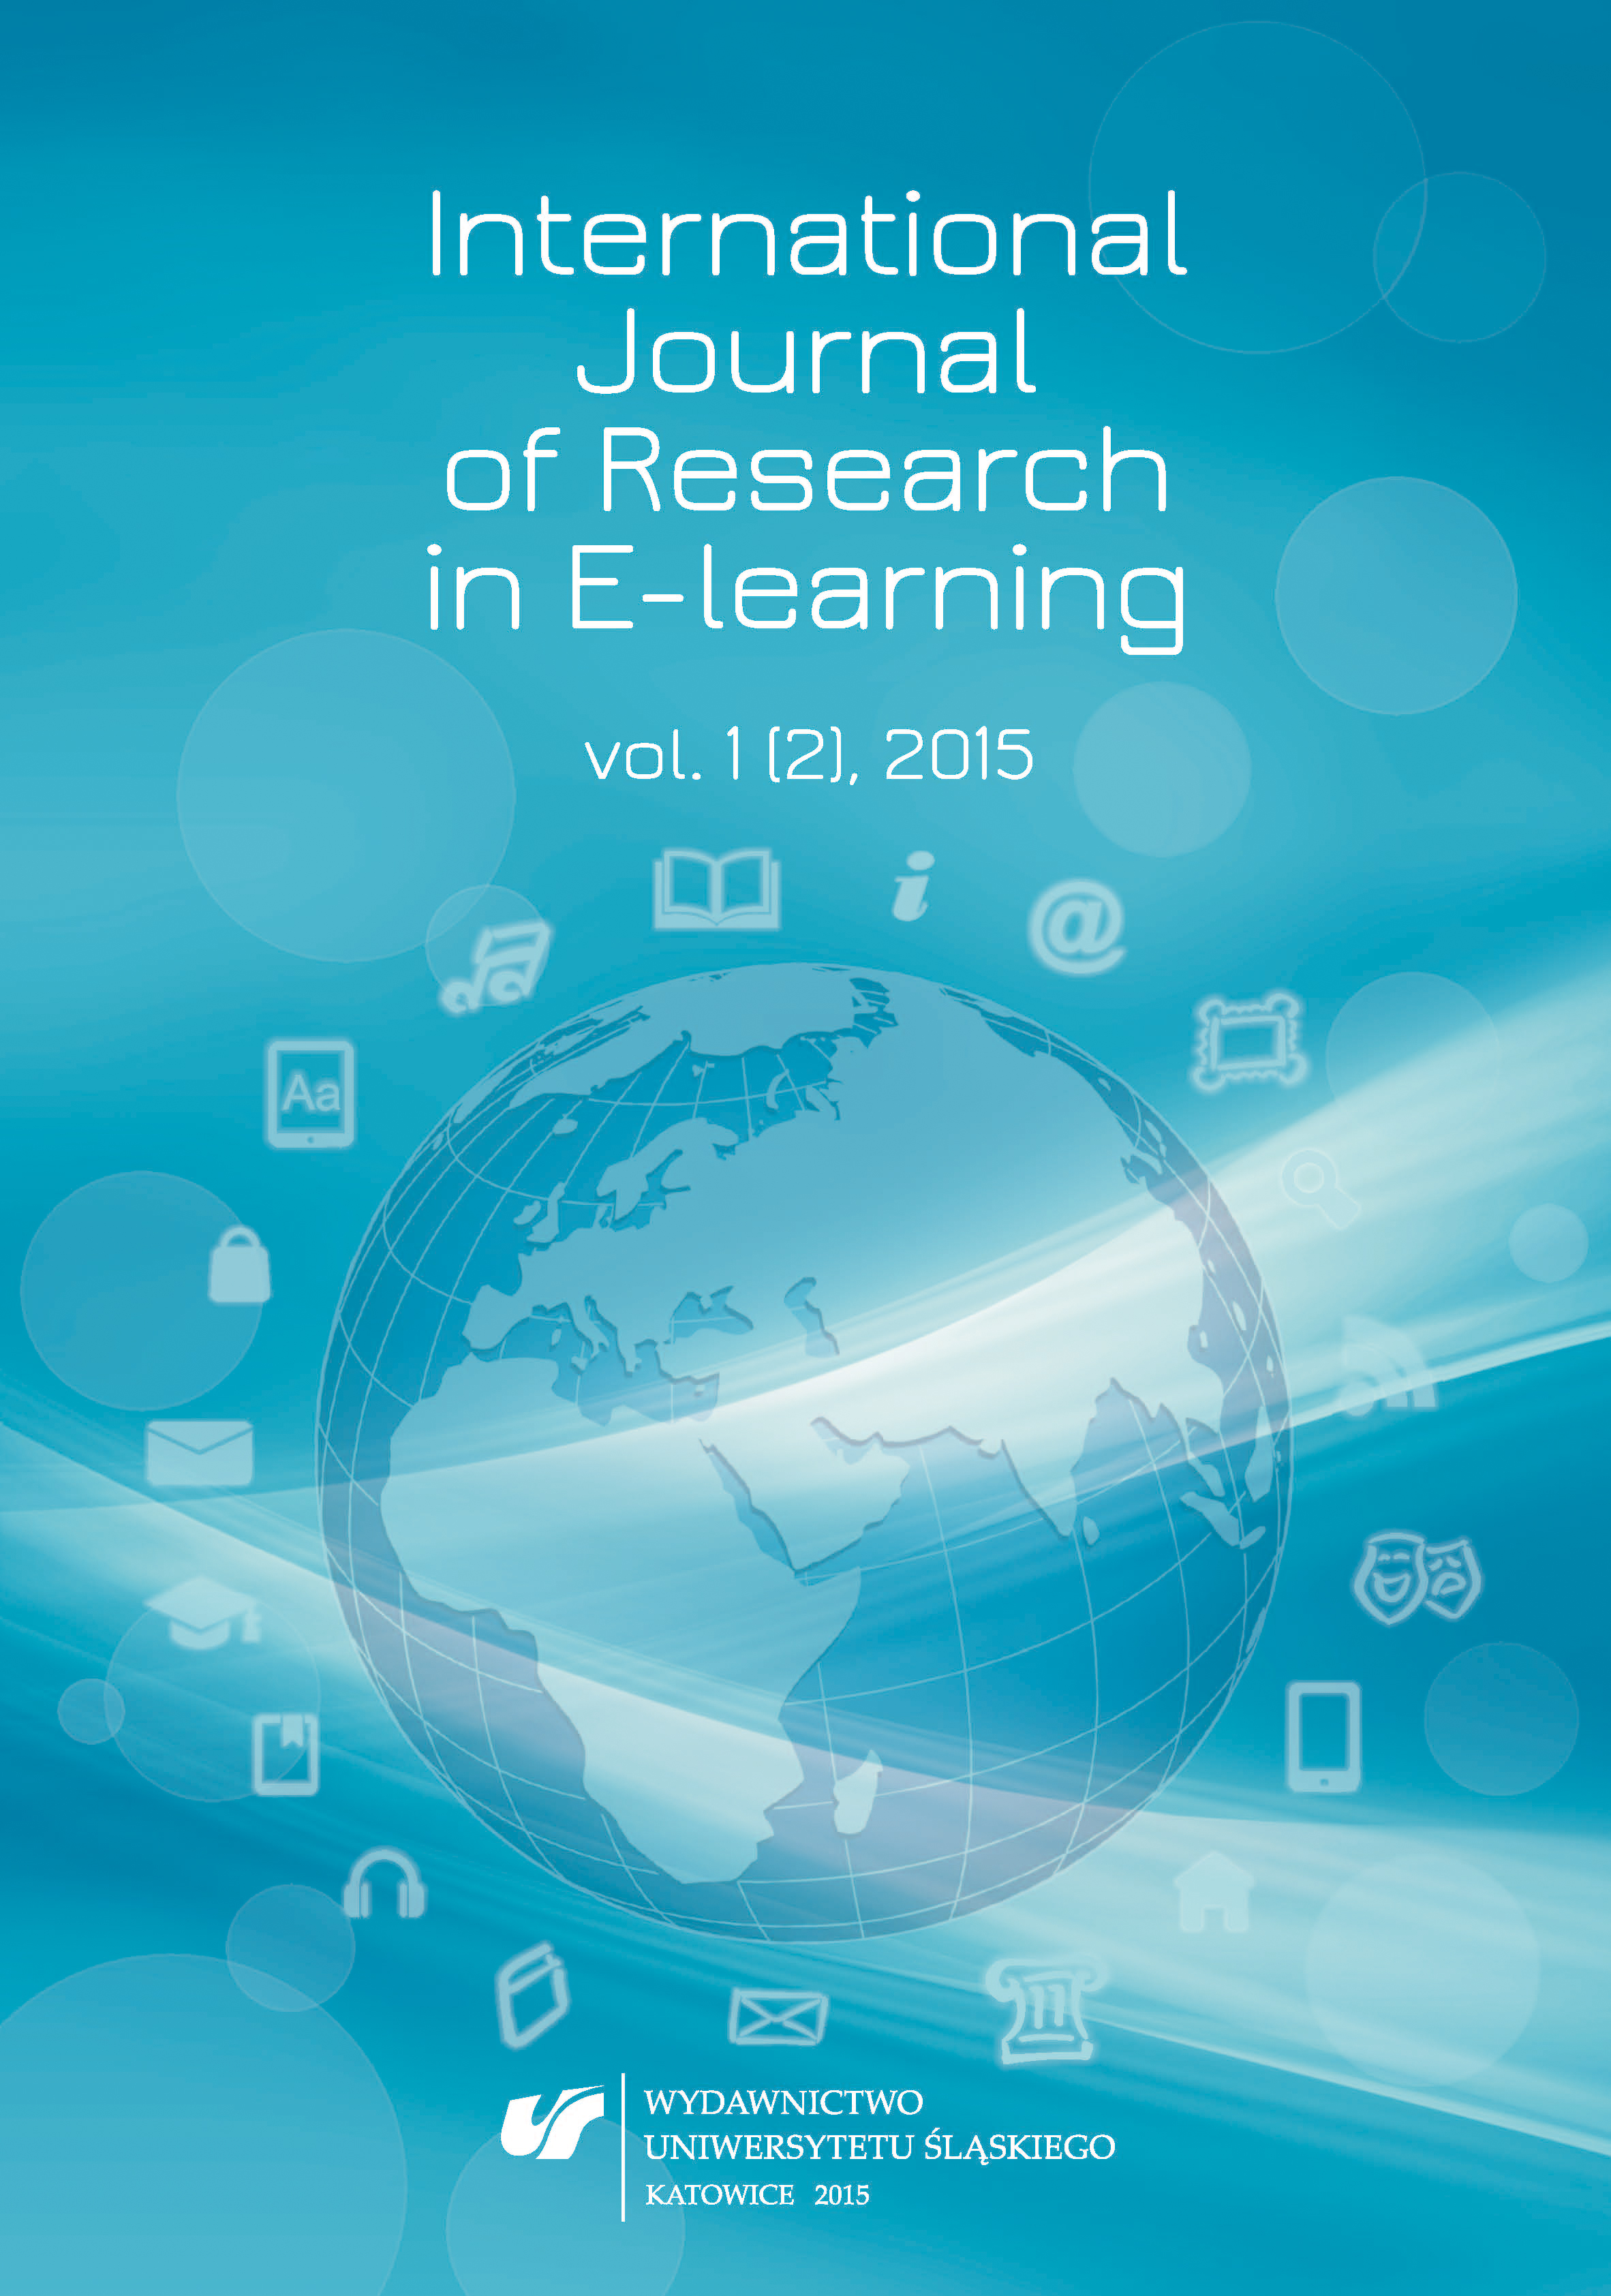 Report on the Implementation of WP3 “Analyses and Evaluation of the ICT Level, E-learning and Intercultural Development in Every Participating Country” in the Framework of the IRNet Project